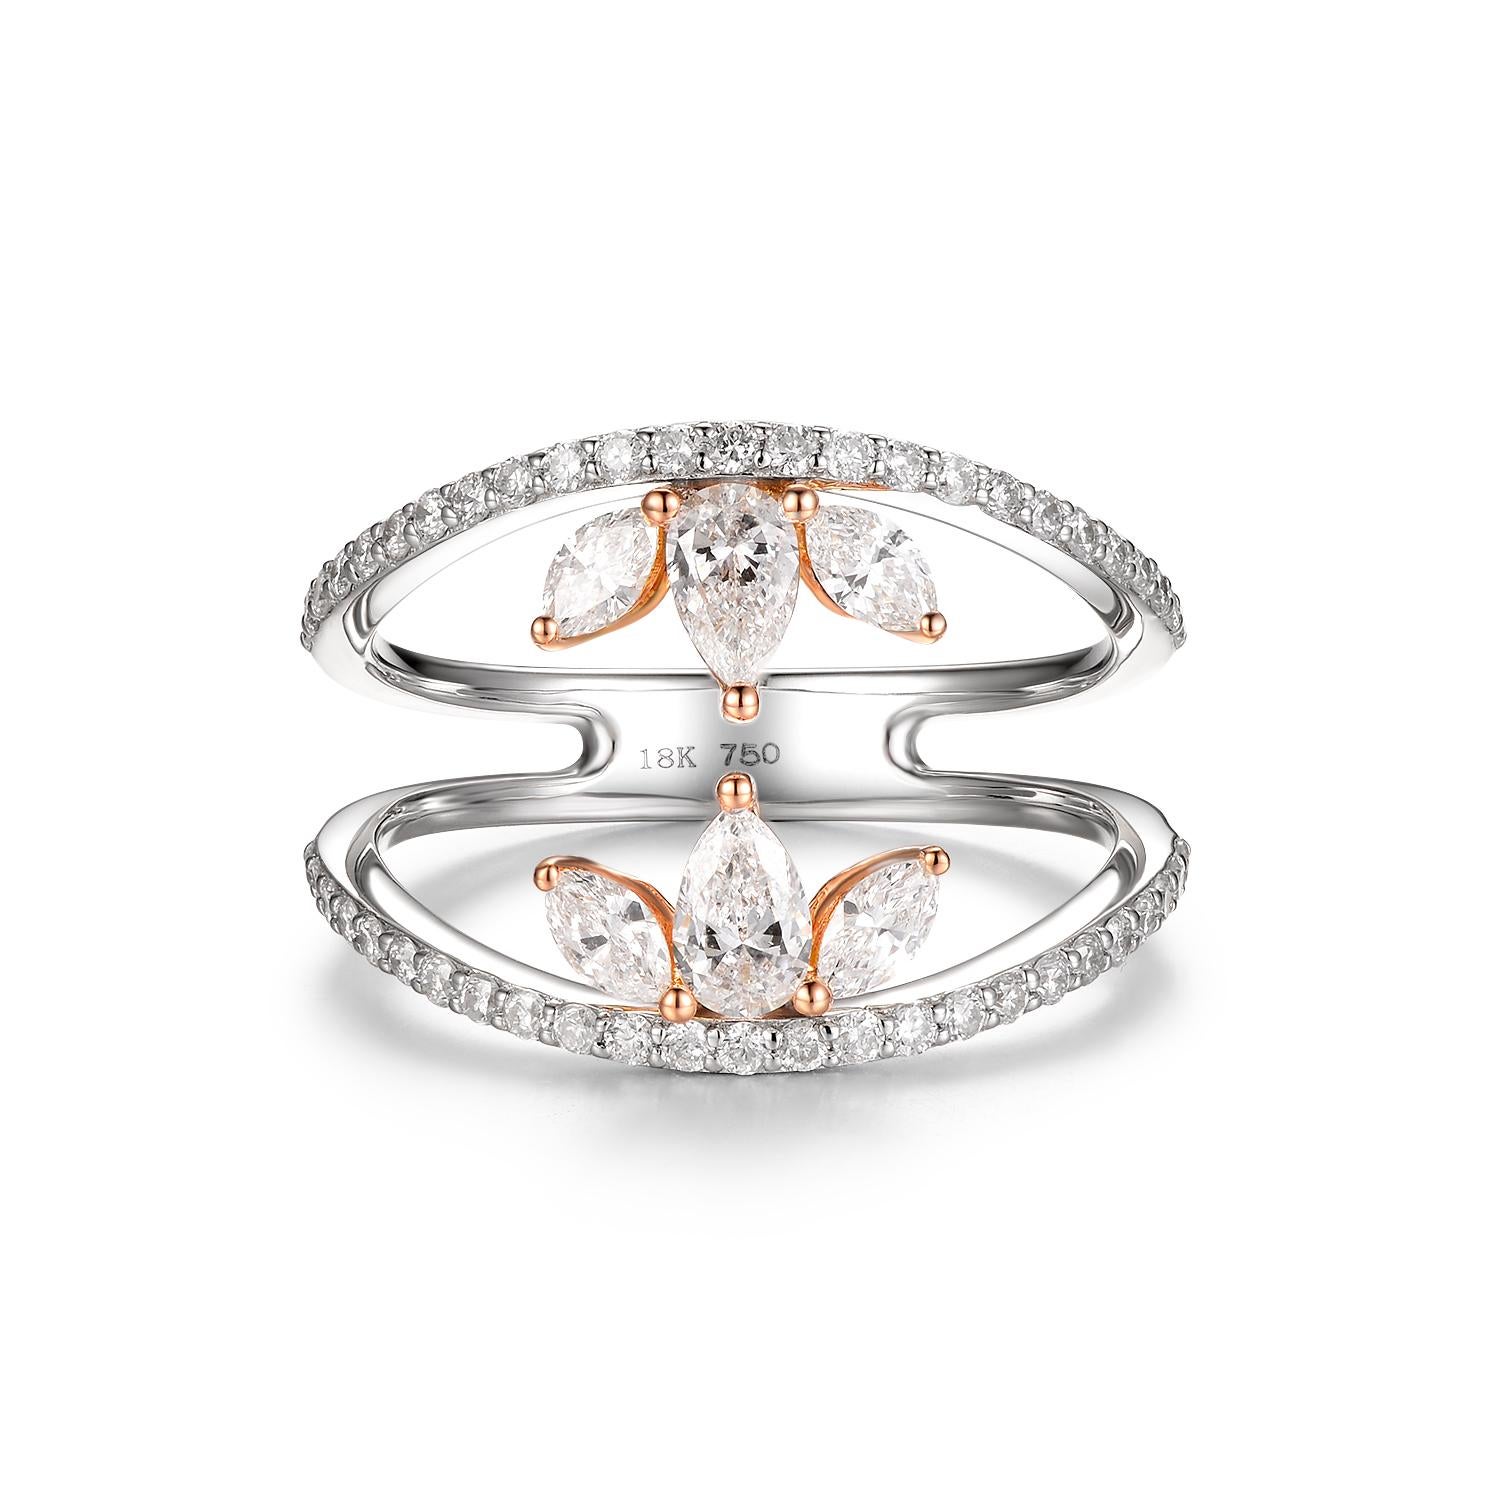 This ring features 2 pear cut diamonds weight 0.32 carat and 4 marquise diamonds weight 0.28 carat. Fancy cut diamonds are set in 18 karat rose gold. Assented with 0.44 carat of white round cut diamonds. 

US 6.5
Resizing is available 
Pear Diamonds